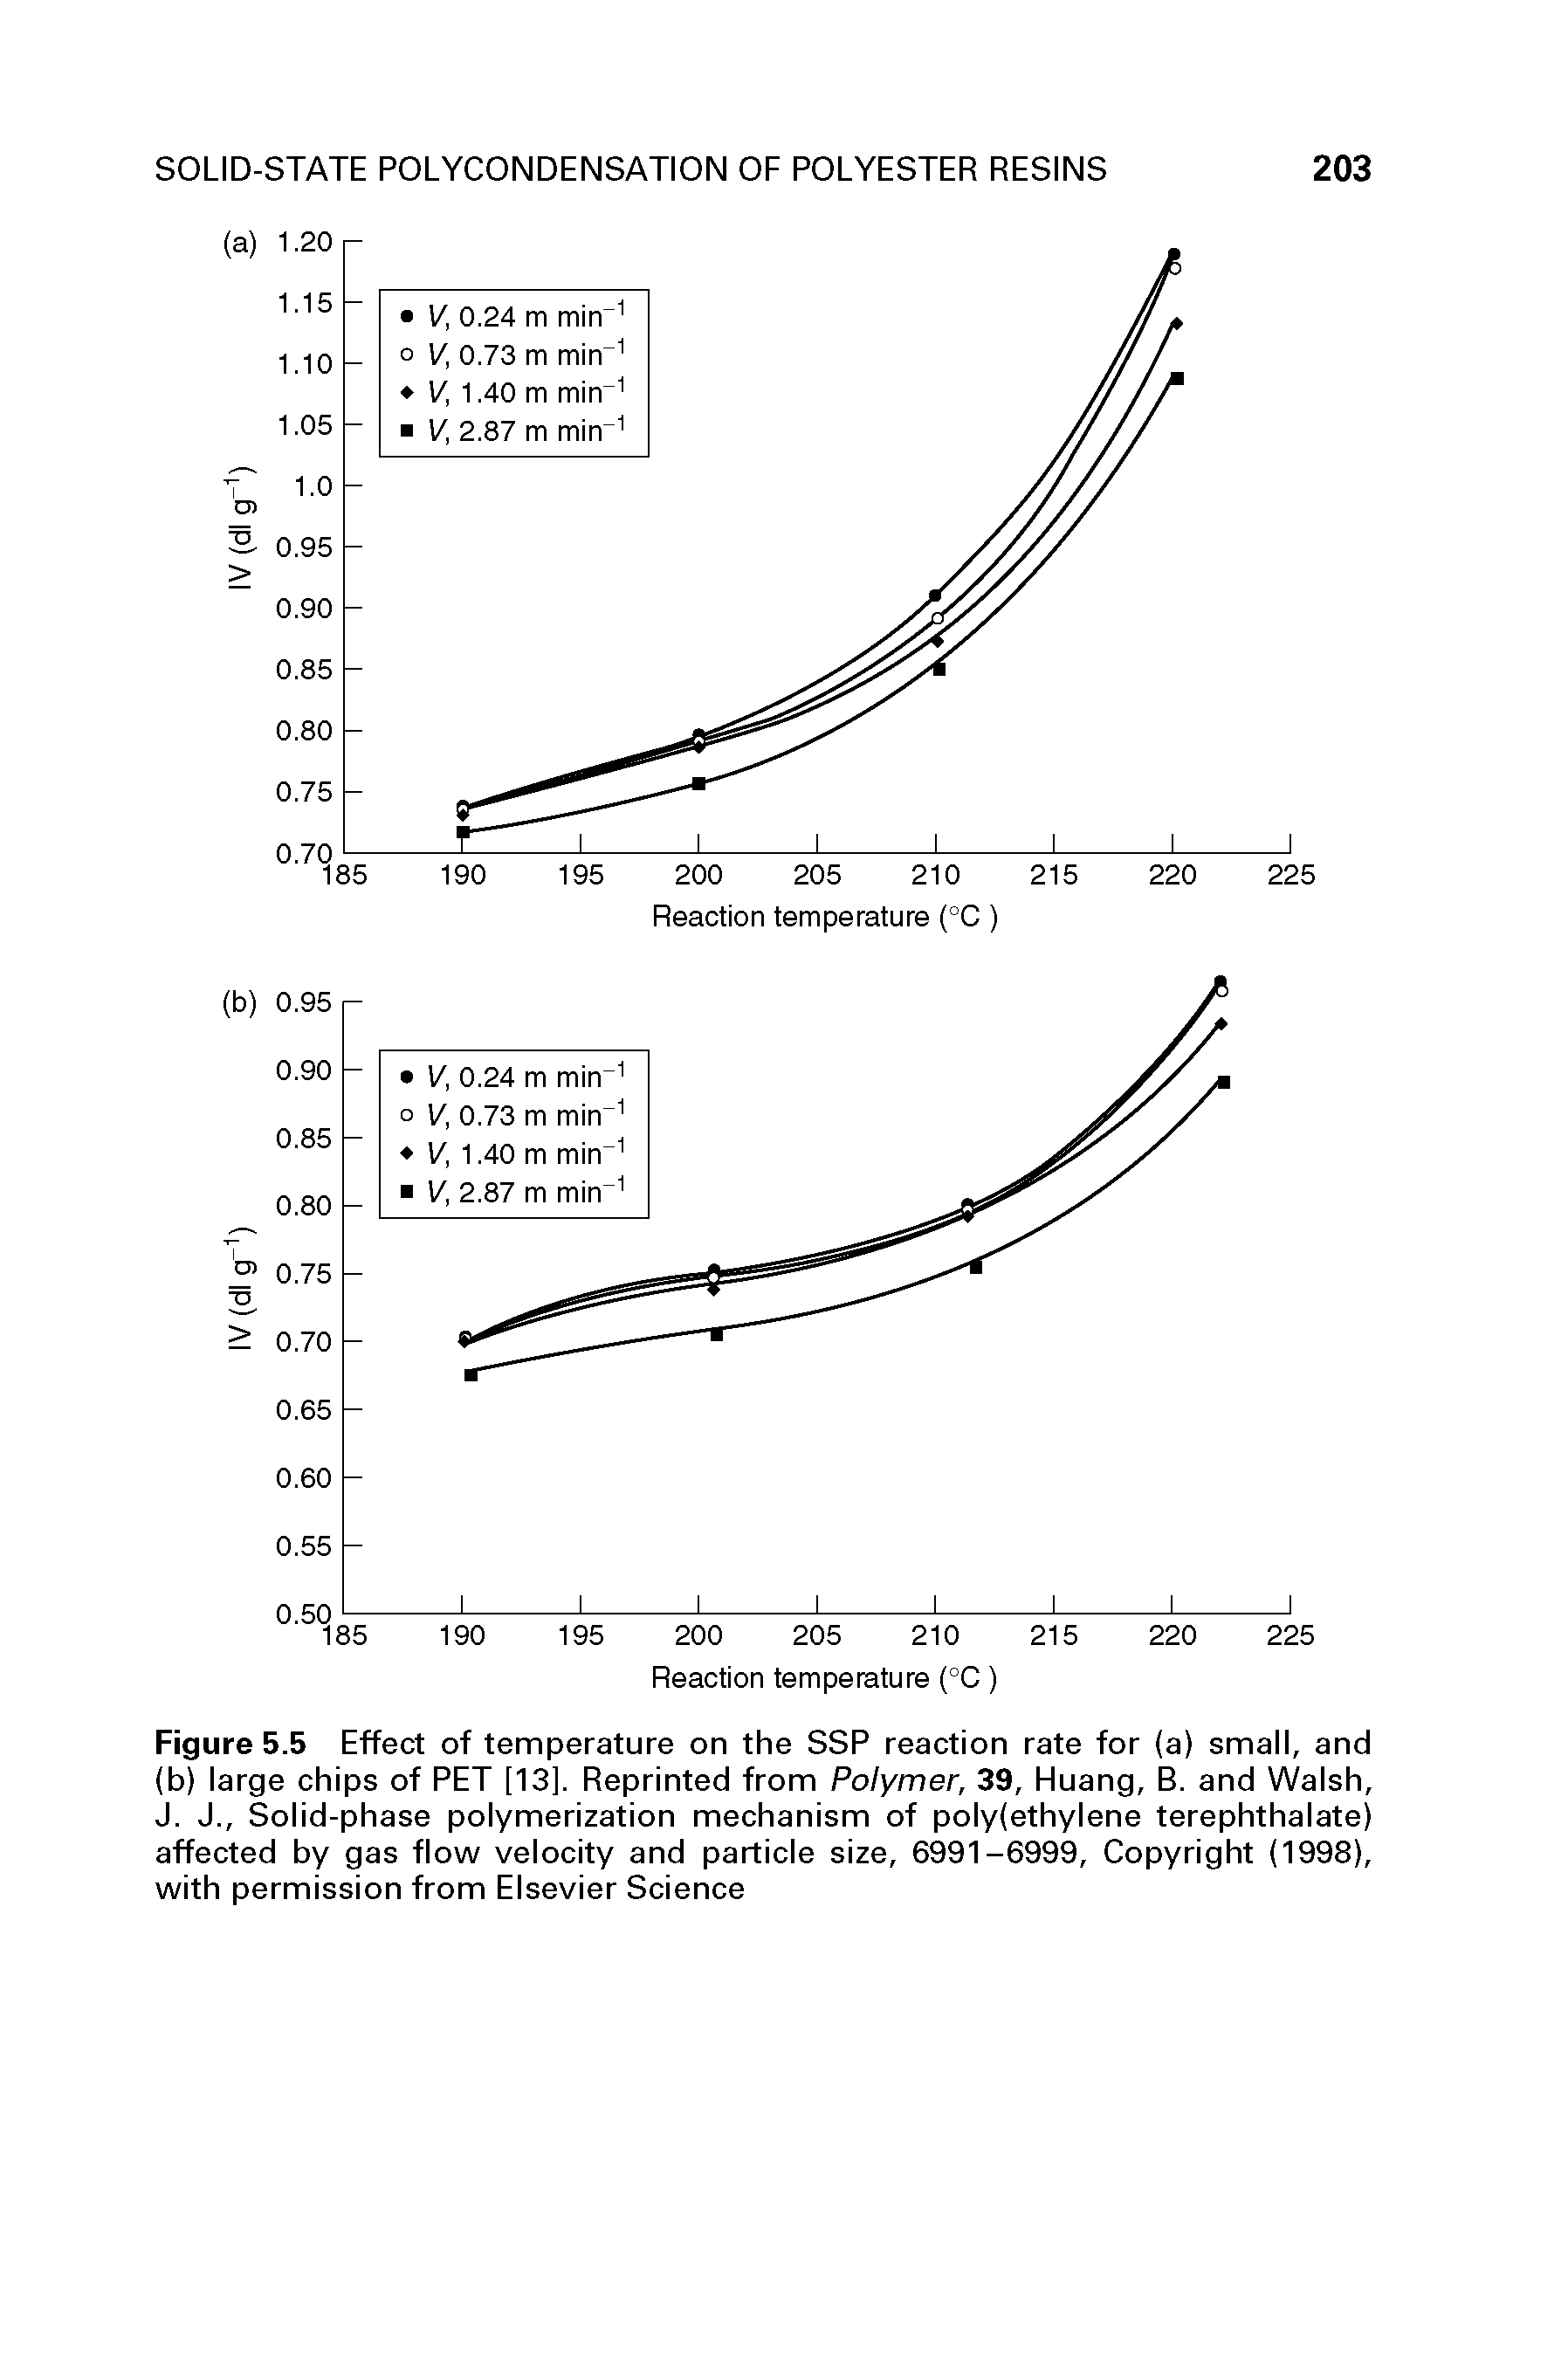 Figure 5.5 Effect of temperature on the SSP reaction rate for (a) small, and (b) large chips of PET [13]. Reprinted from Polymer, 39, Huang, B. and Walsh, J. J., Solid-phase polymerization mechanism of poly(ethylene terephthalate) affected by gas flow velocity and particle size, 6991-6999, Copyright (1998), with permission from Elsevier Science...